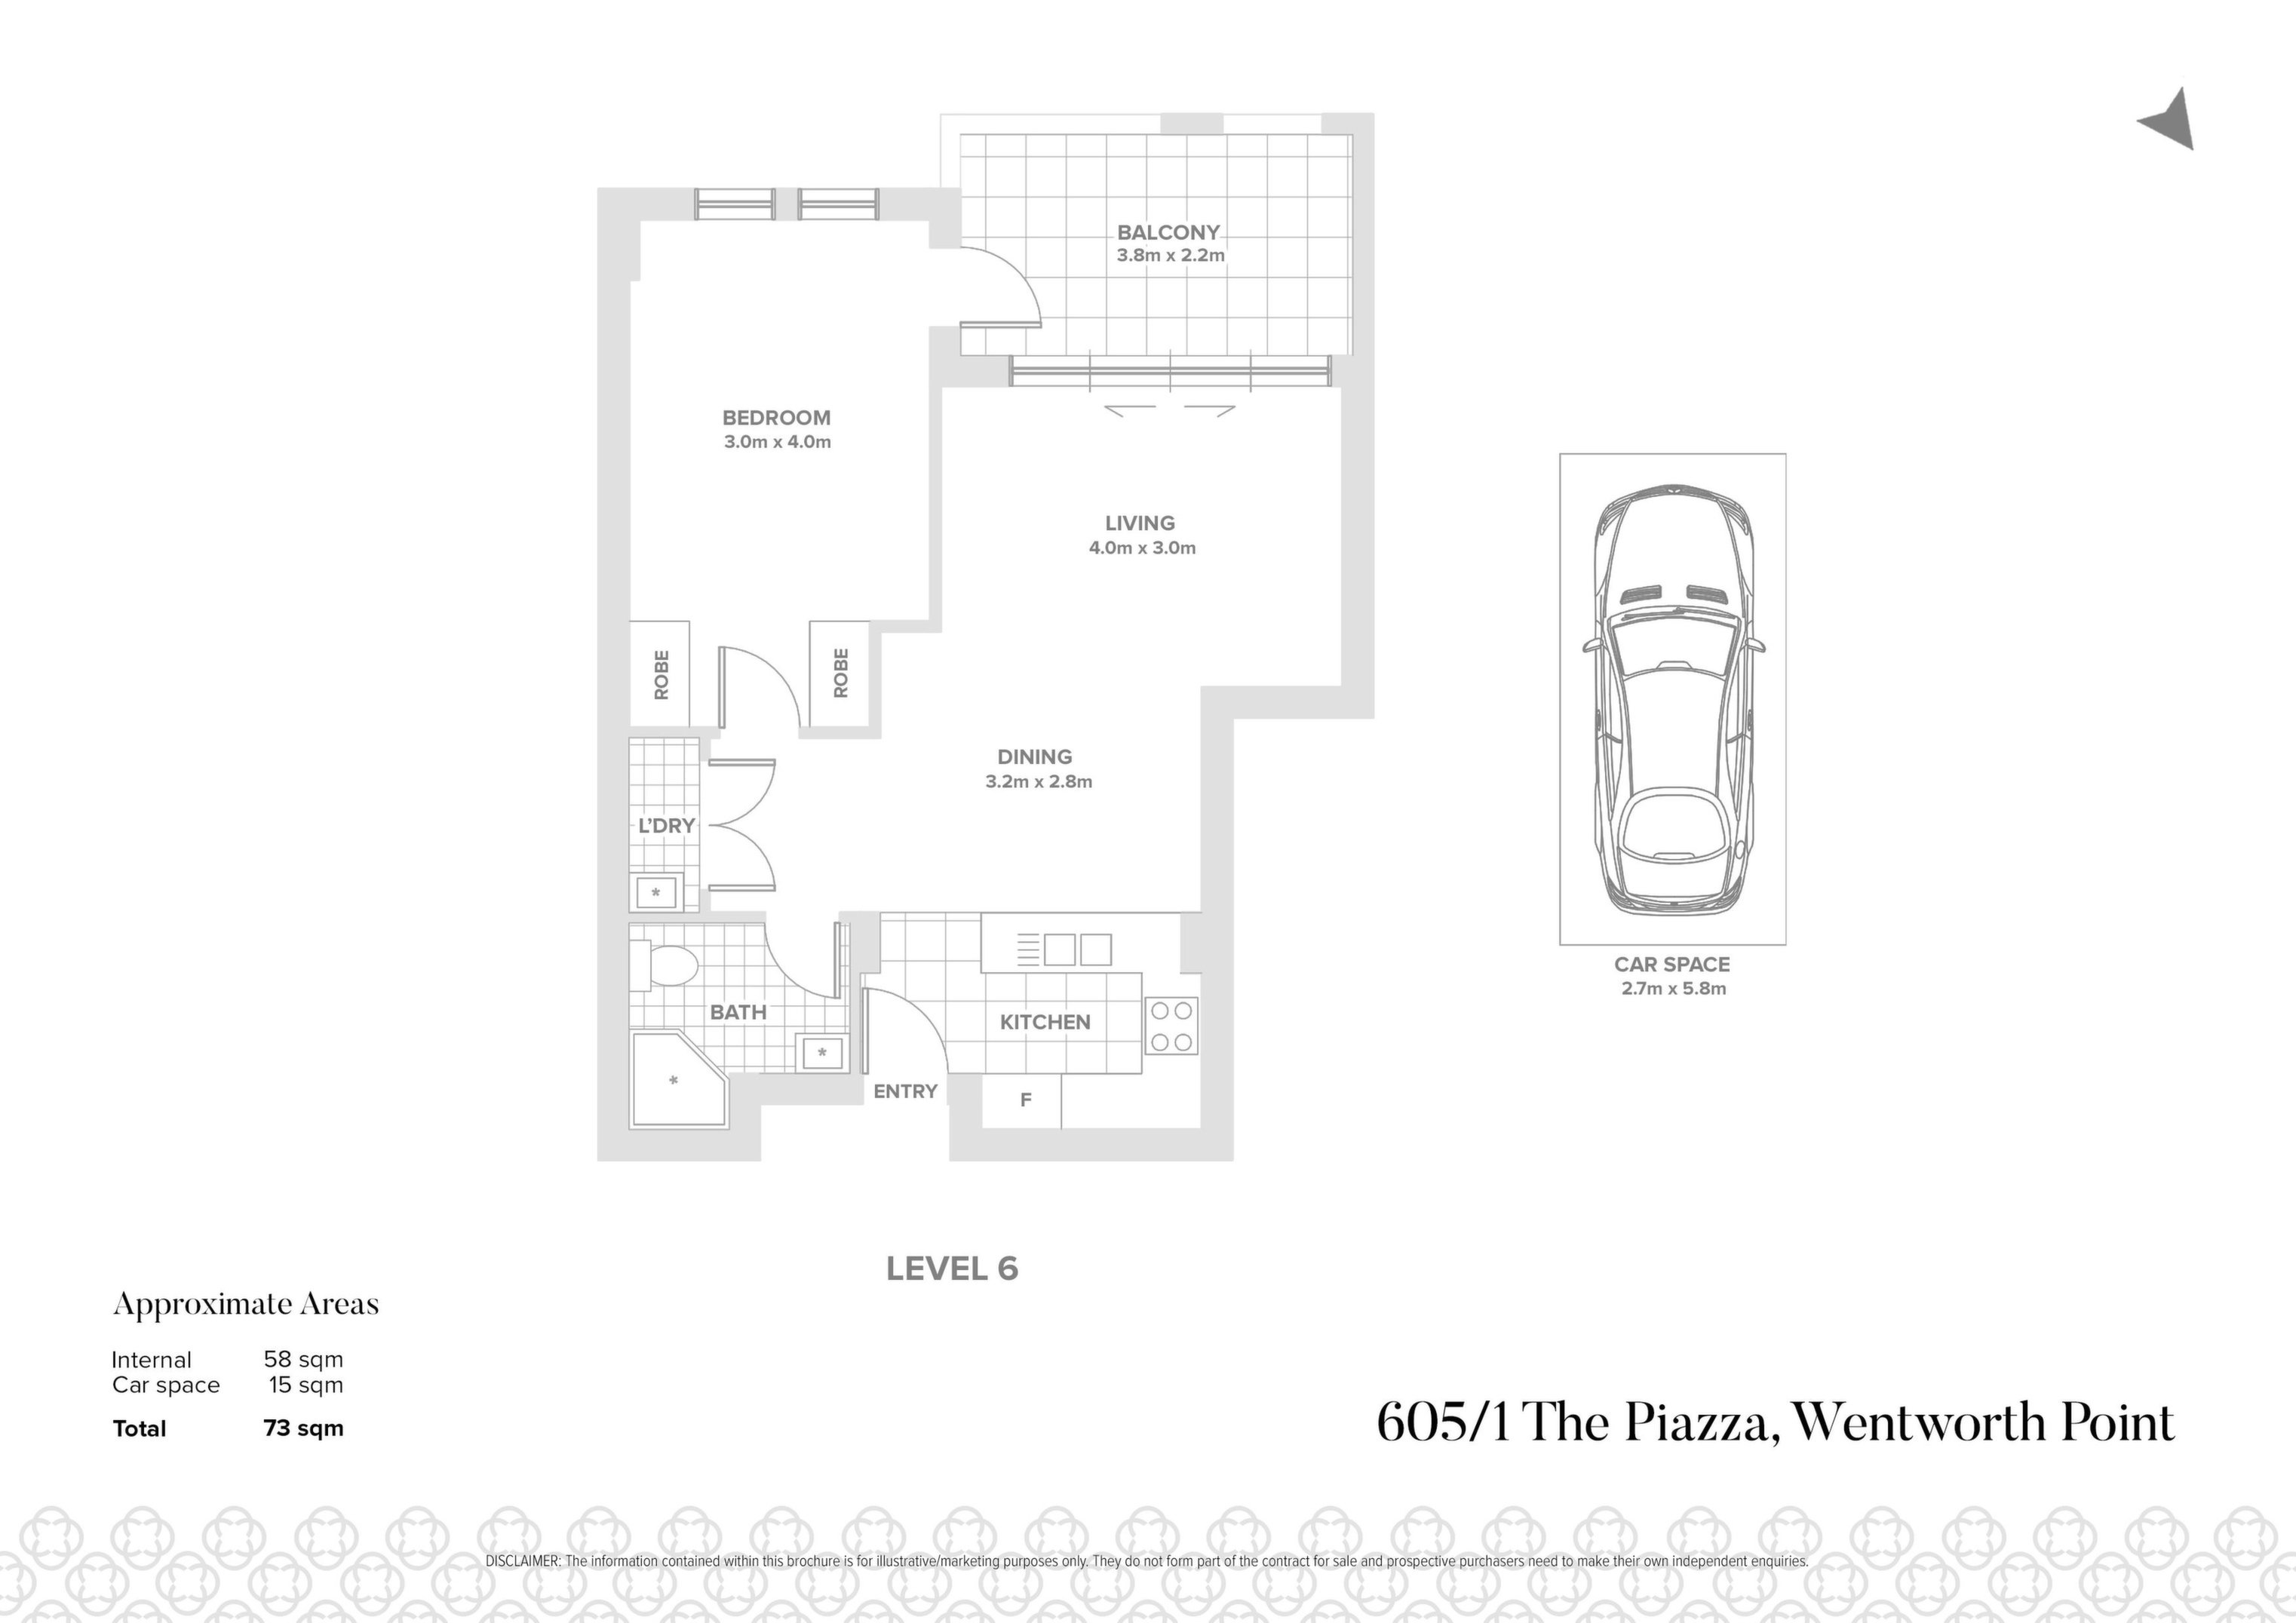 605/1 The Piazza, Wentworth Point Sold by Chidiac Realty - floorplan